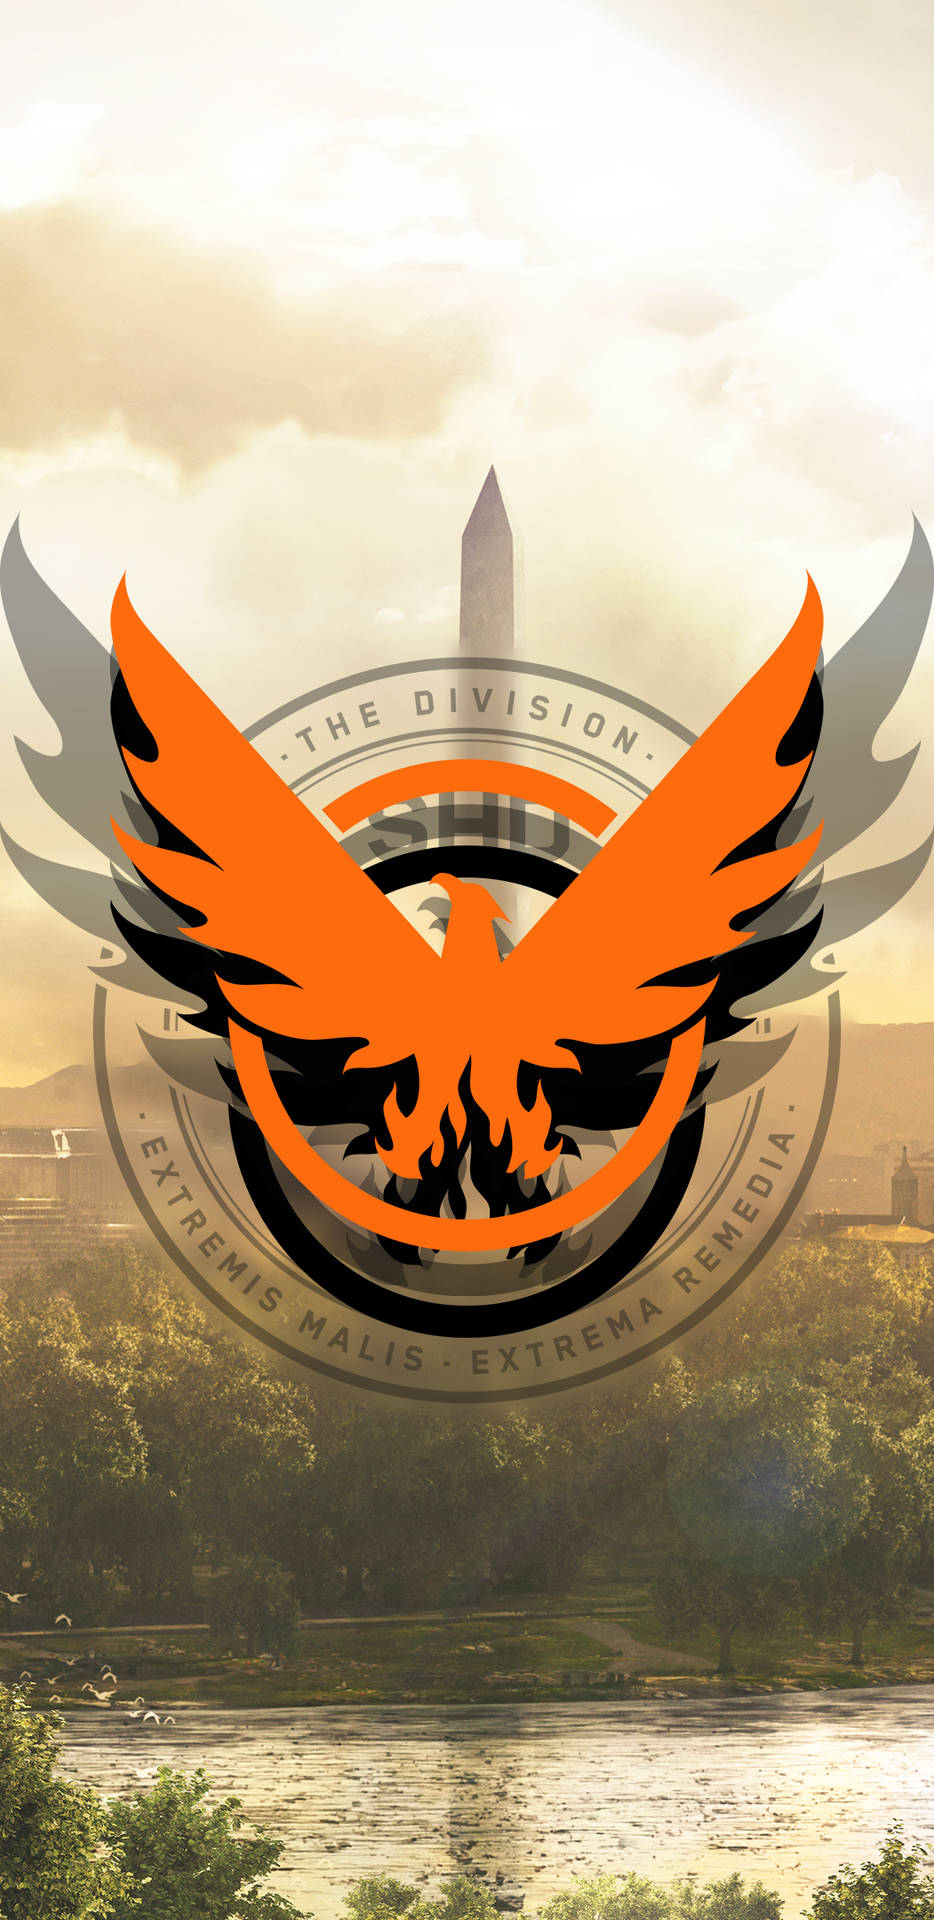 The Division Wallpapers by Max Osipovsky on Dribbble